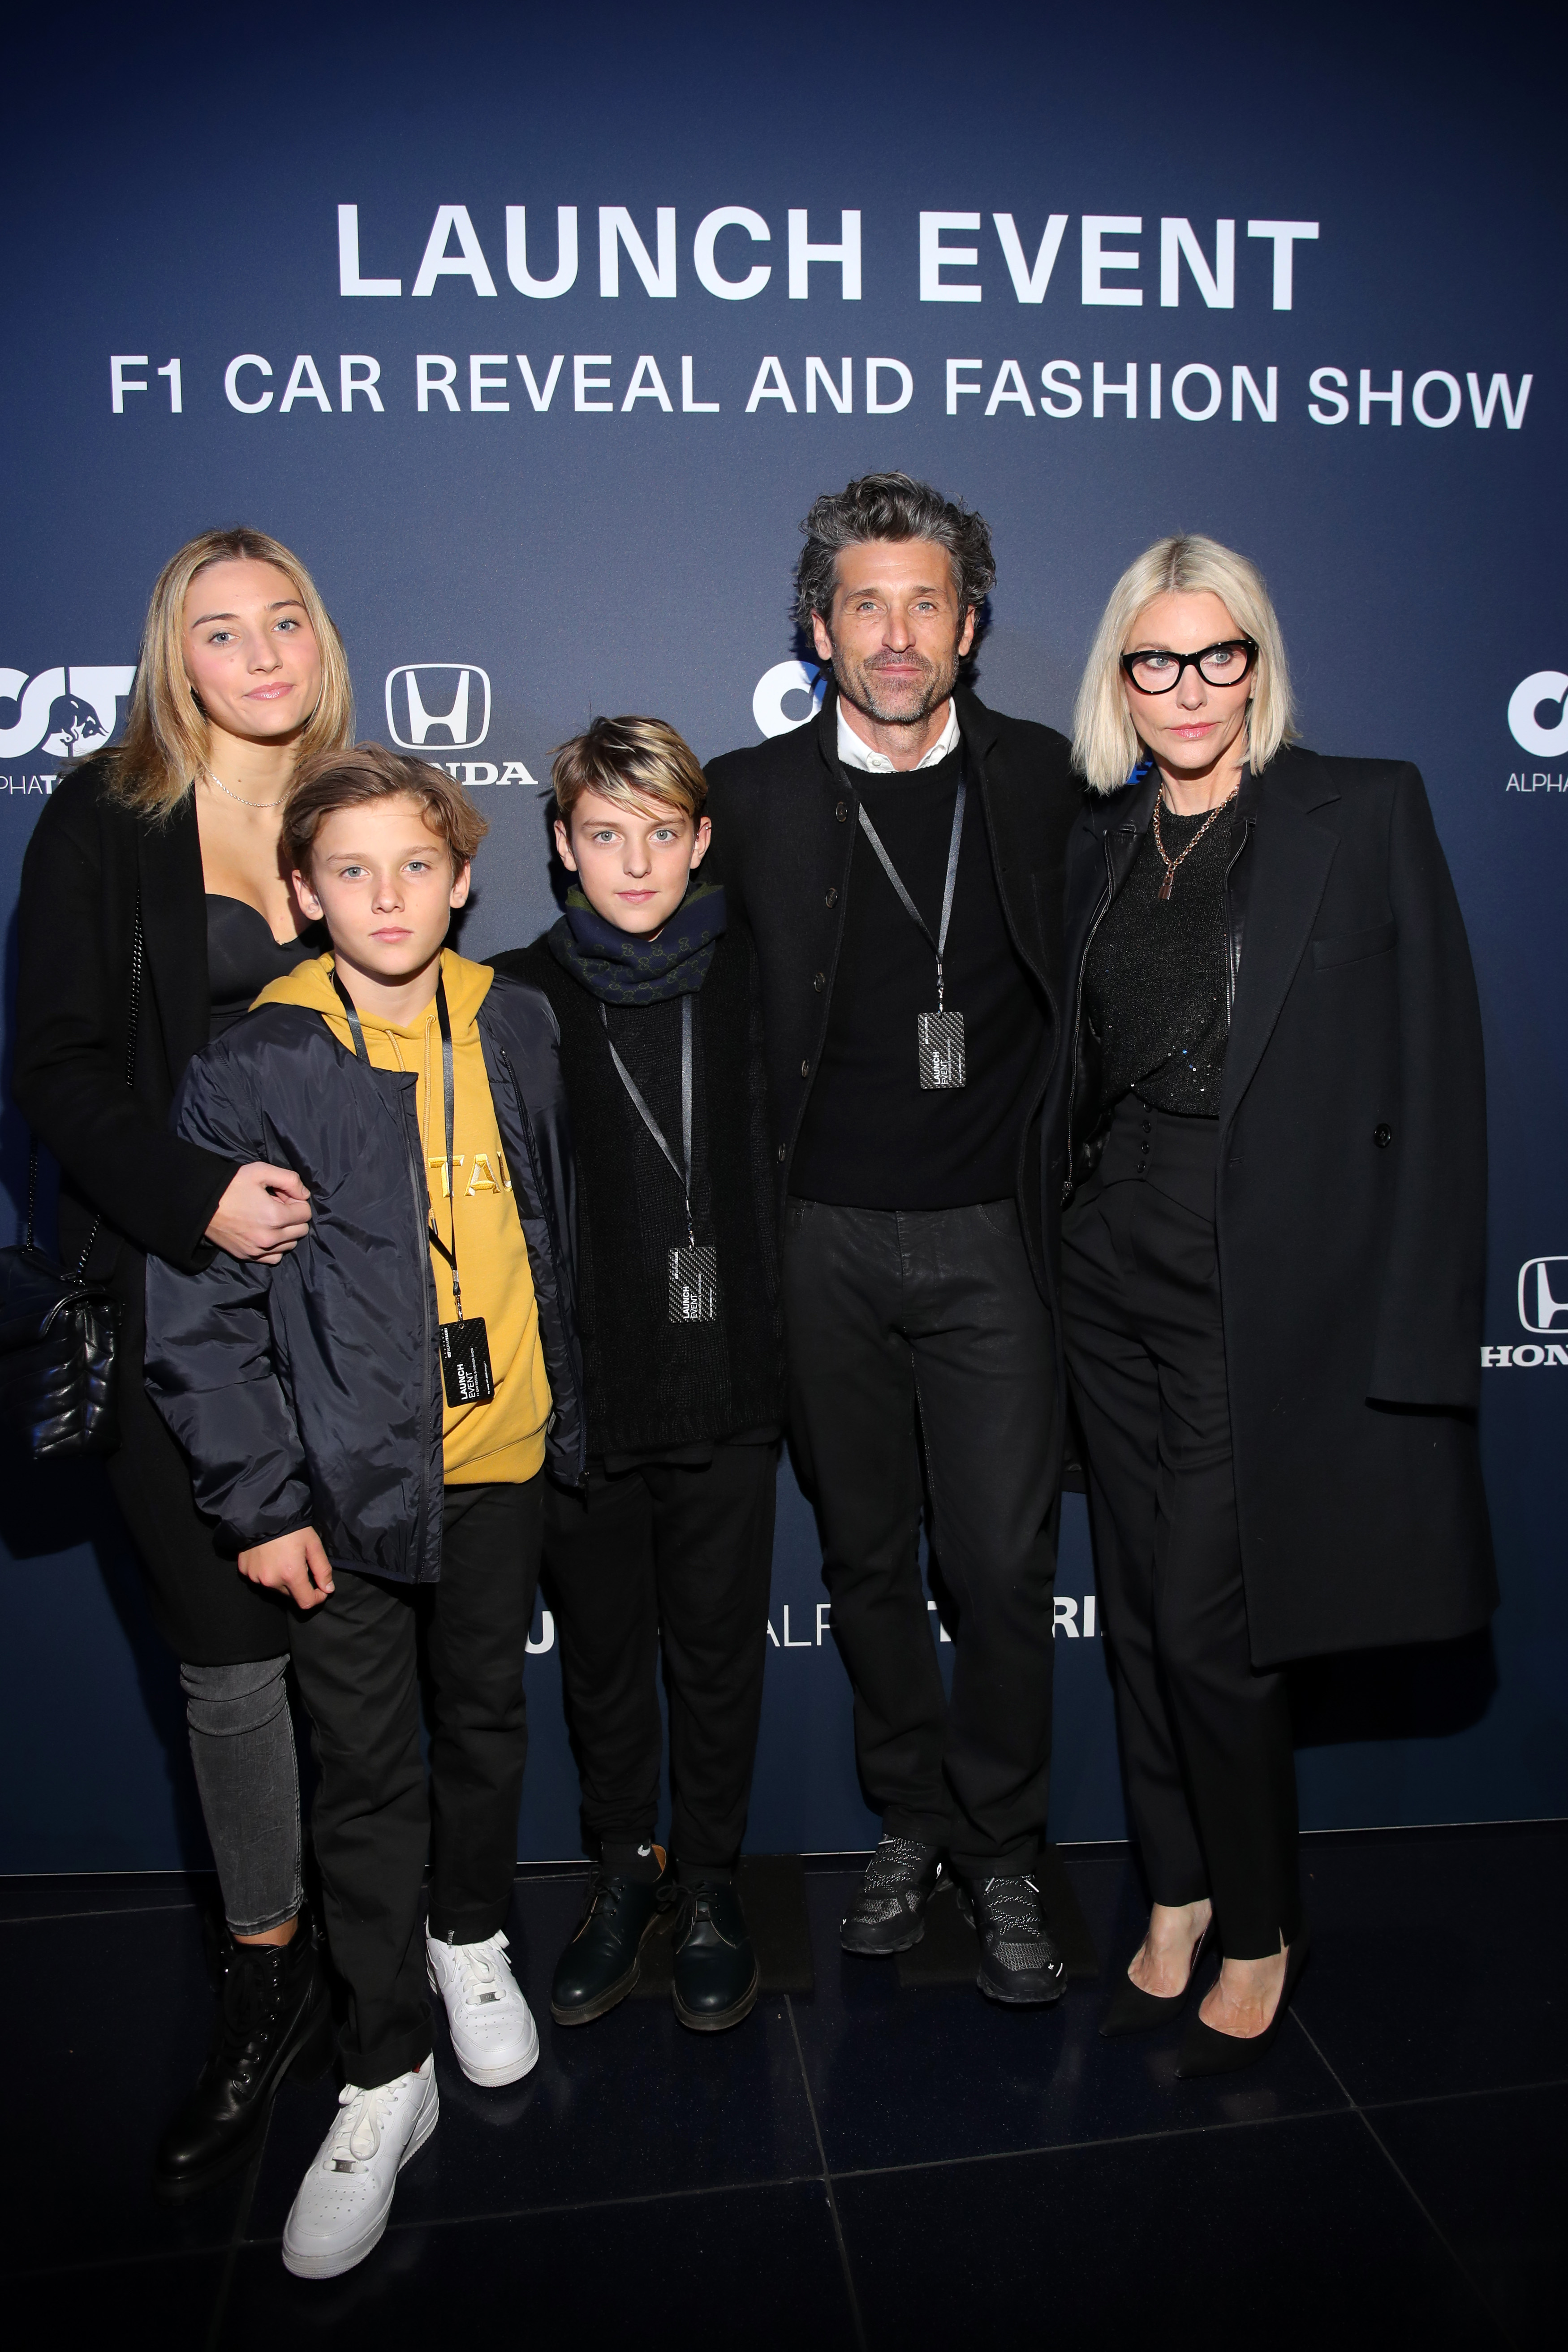 Talula, Darby, Sullivan, and Patrick Dempsey with Jillian Fink at an event in 2020. | Source: Getty Images